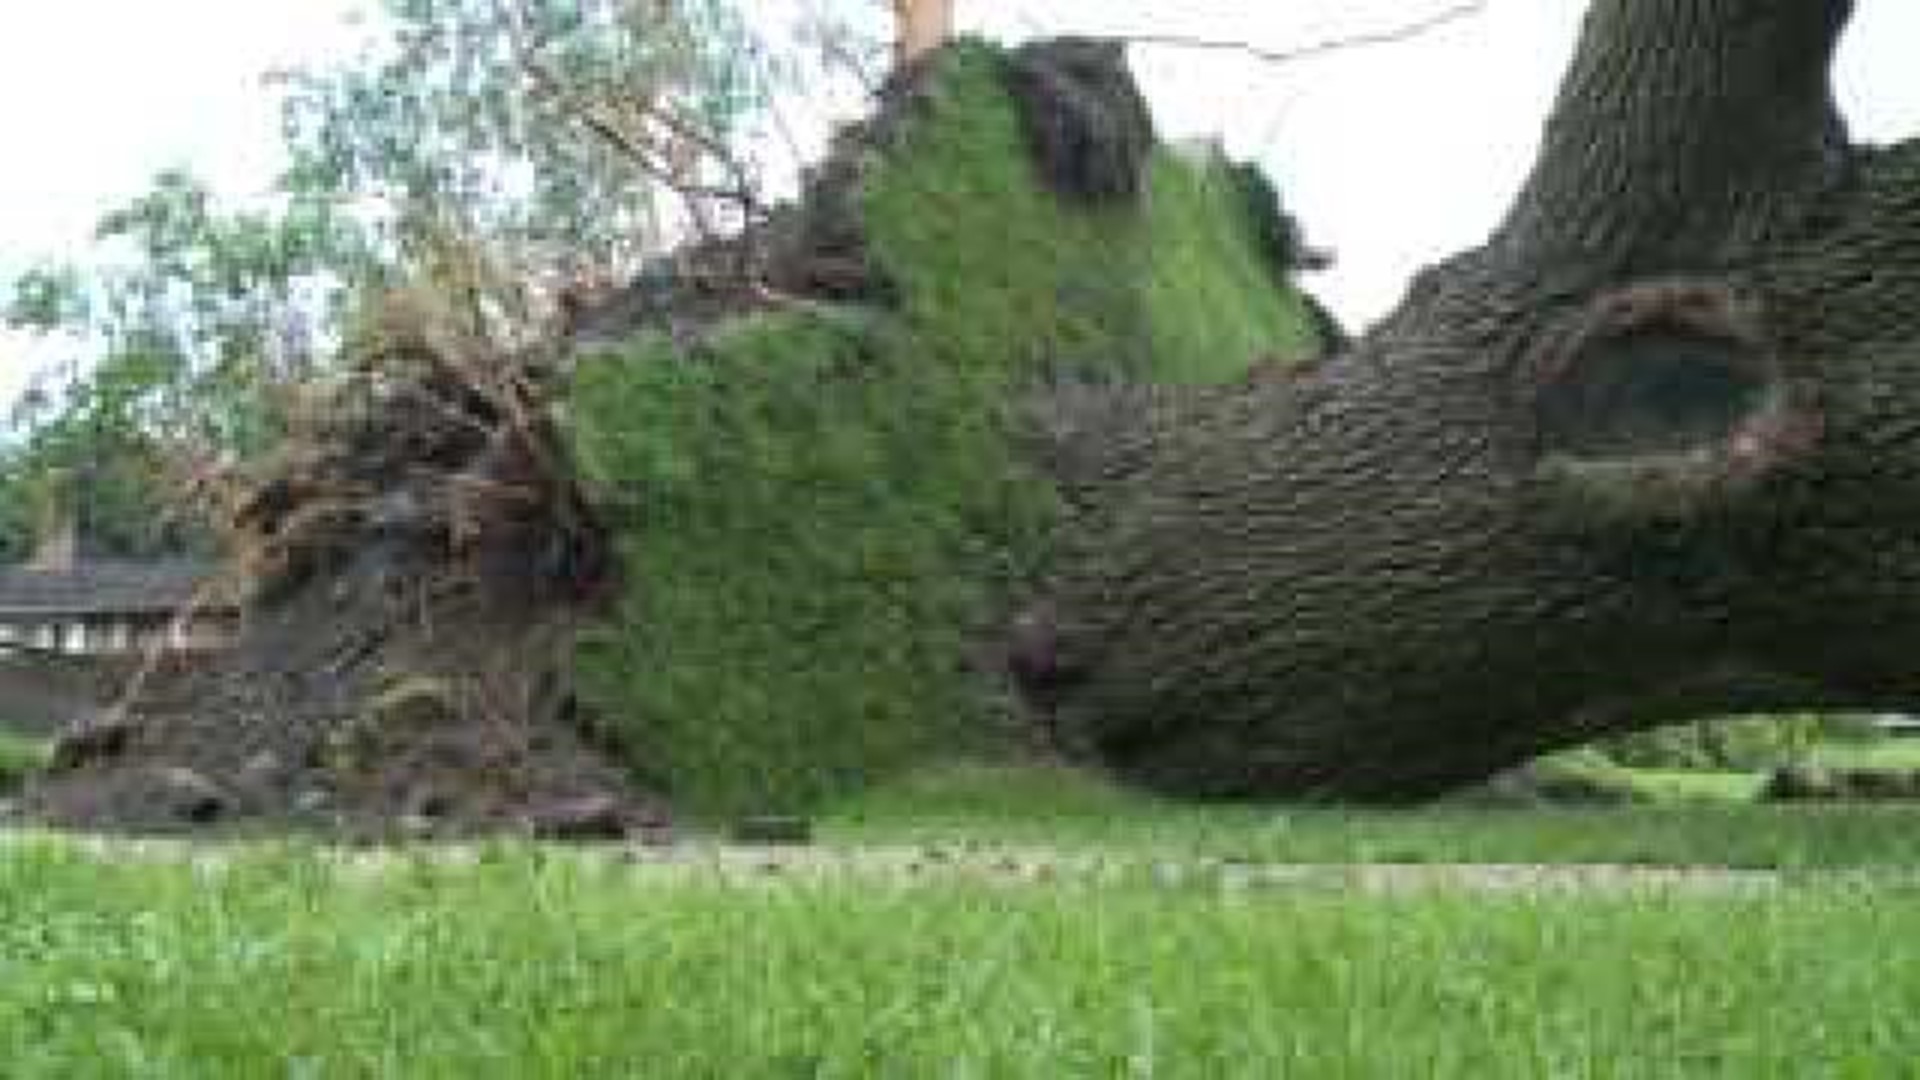 Trees 'ripped from the ground' after storm in Clinton